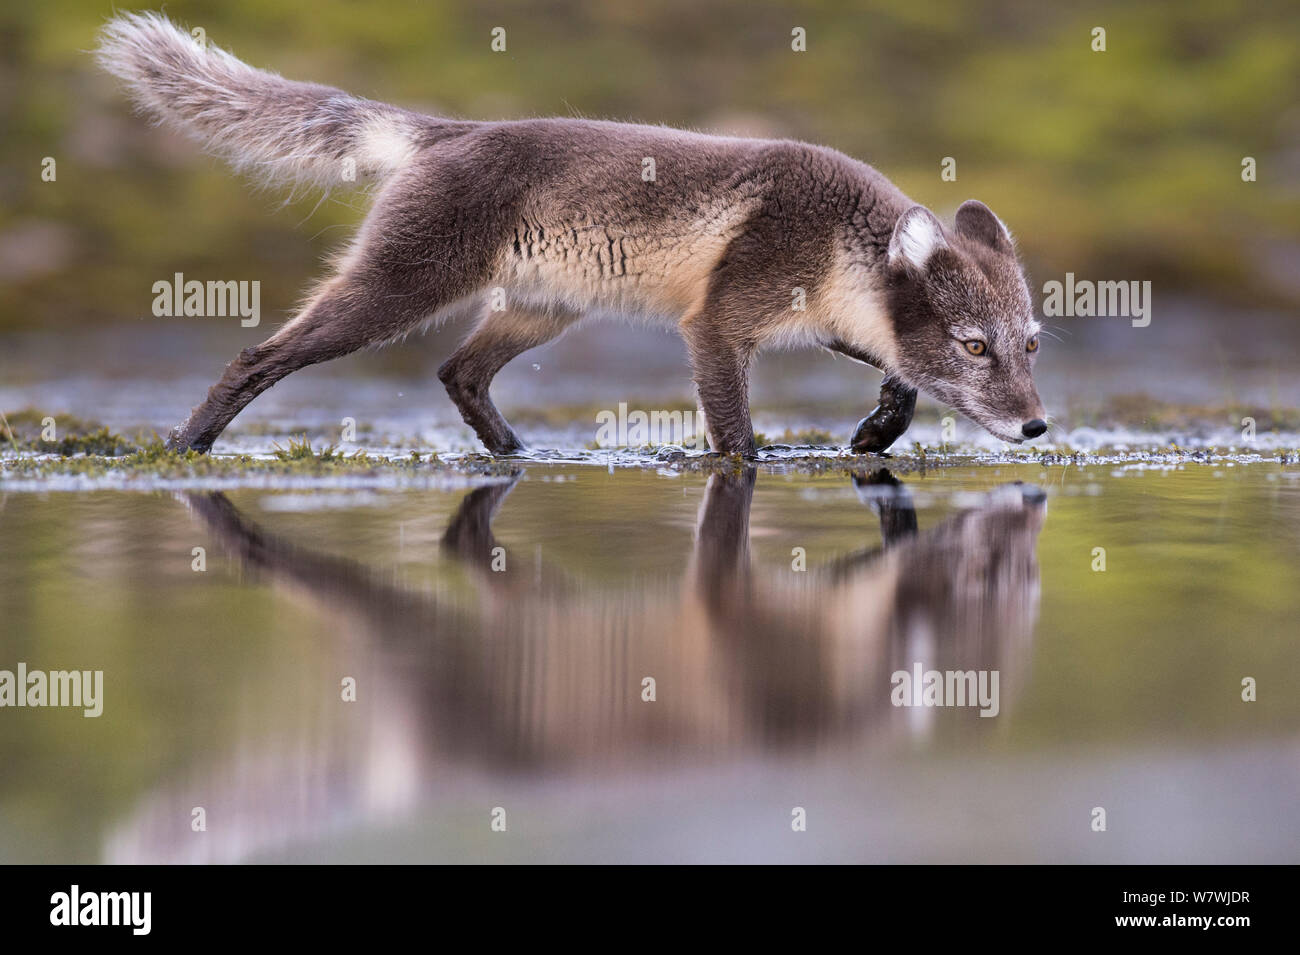 Arctic fox (Vulpes lagopus) searching for food near water, Spitsbergen, Svalbard, Norway, July. Stock Photo